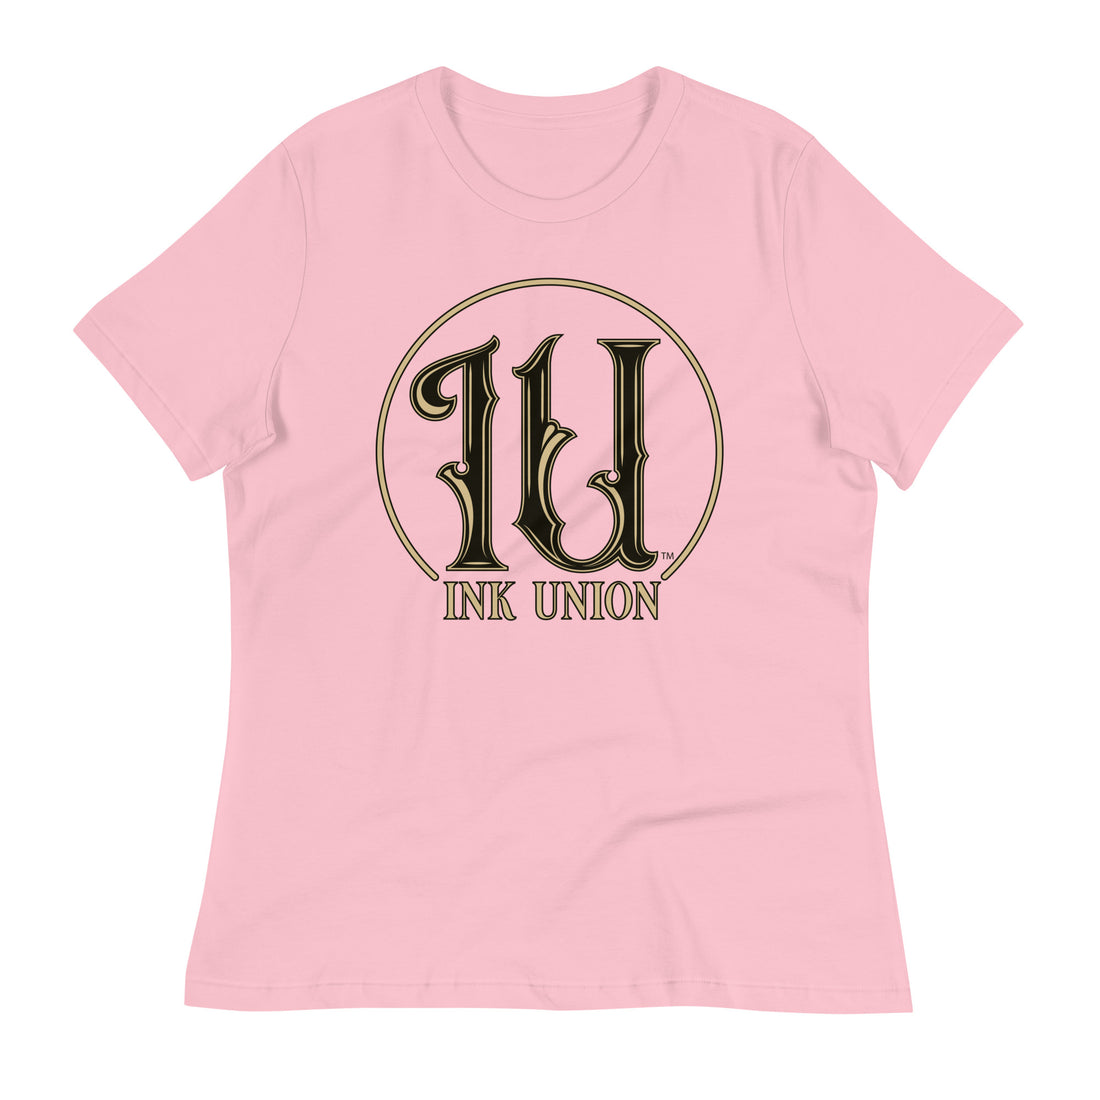 Ink Union Clothing Co. pink t-shirt featuring the Ink Union ring logo in black and gold.